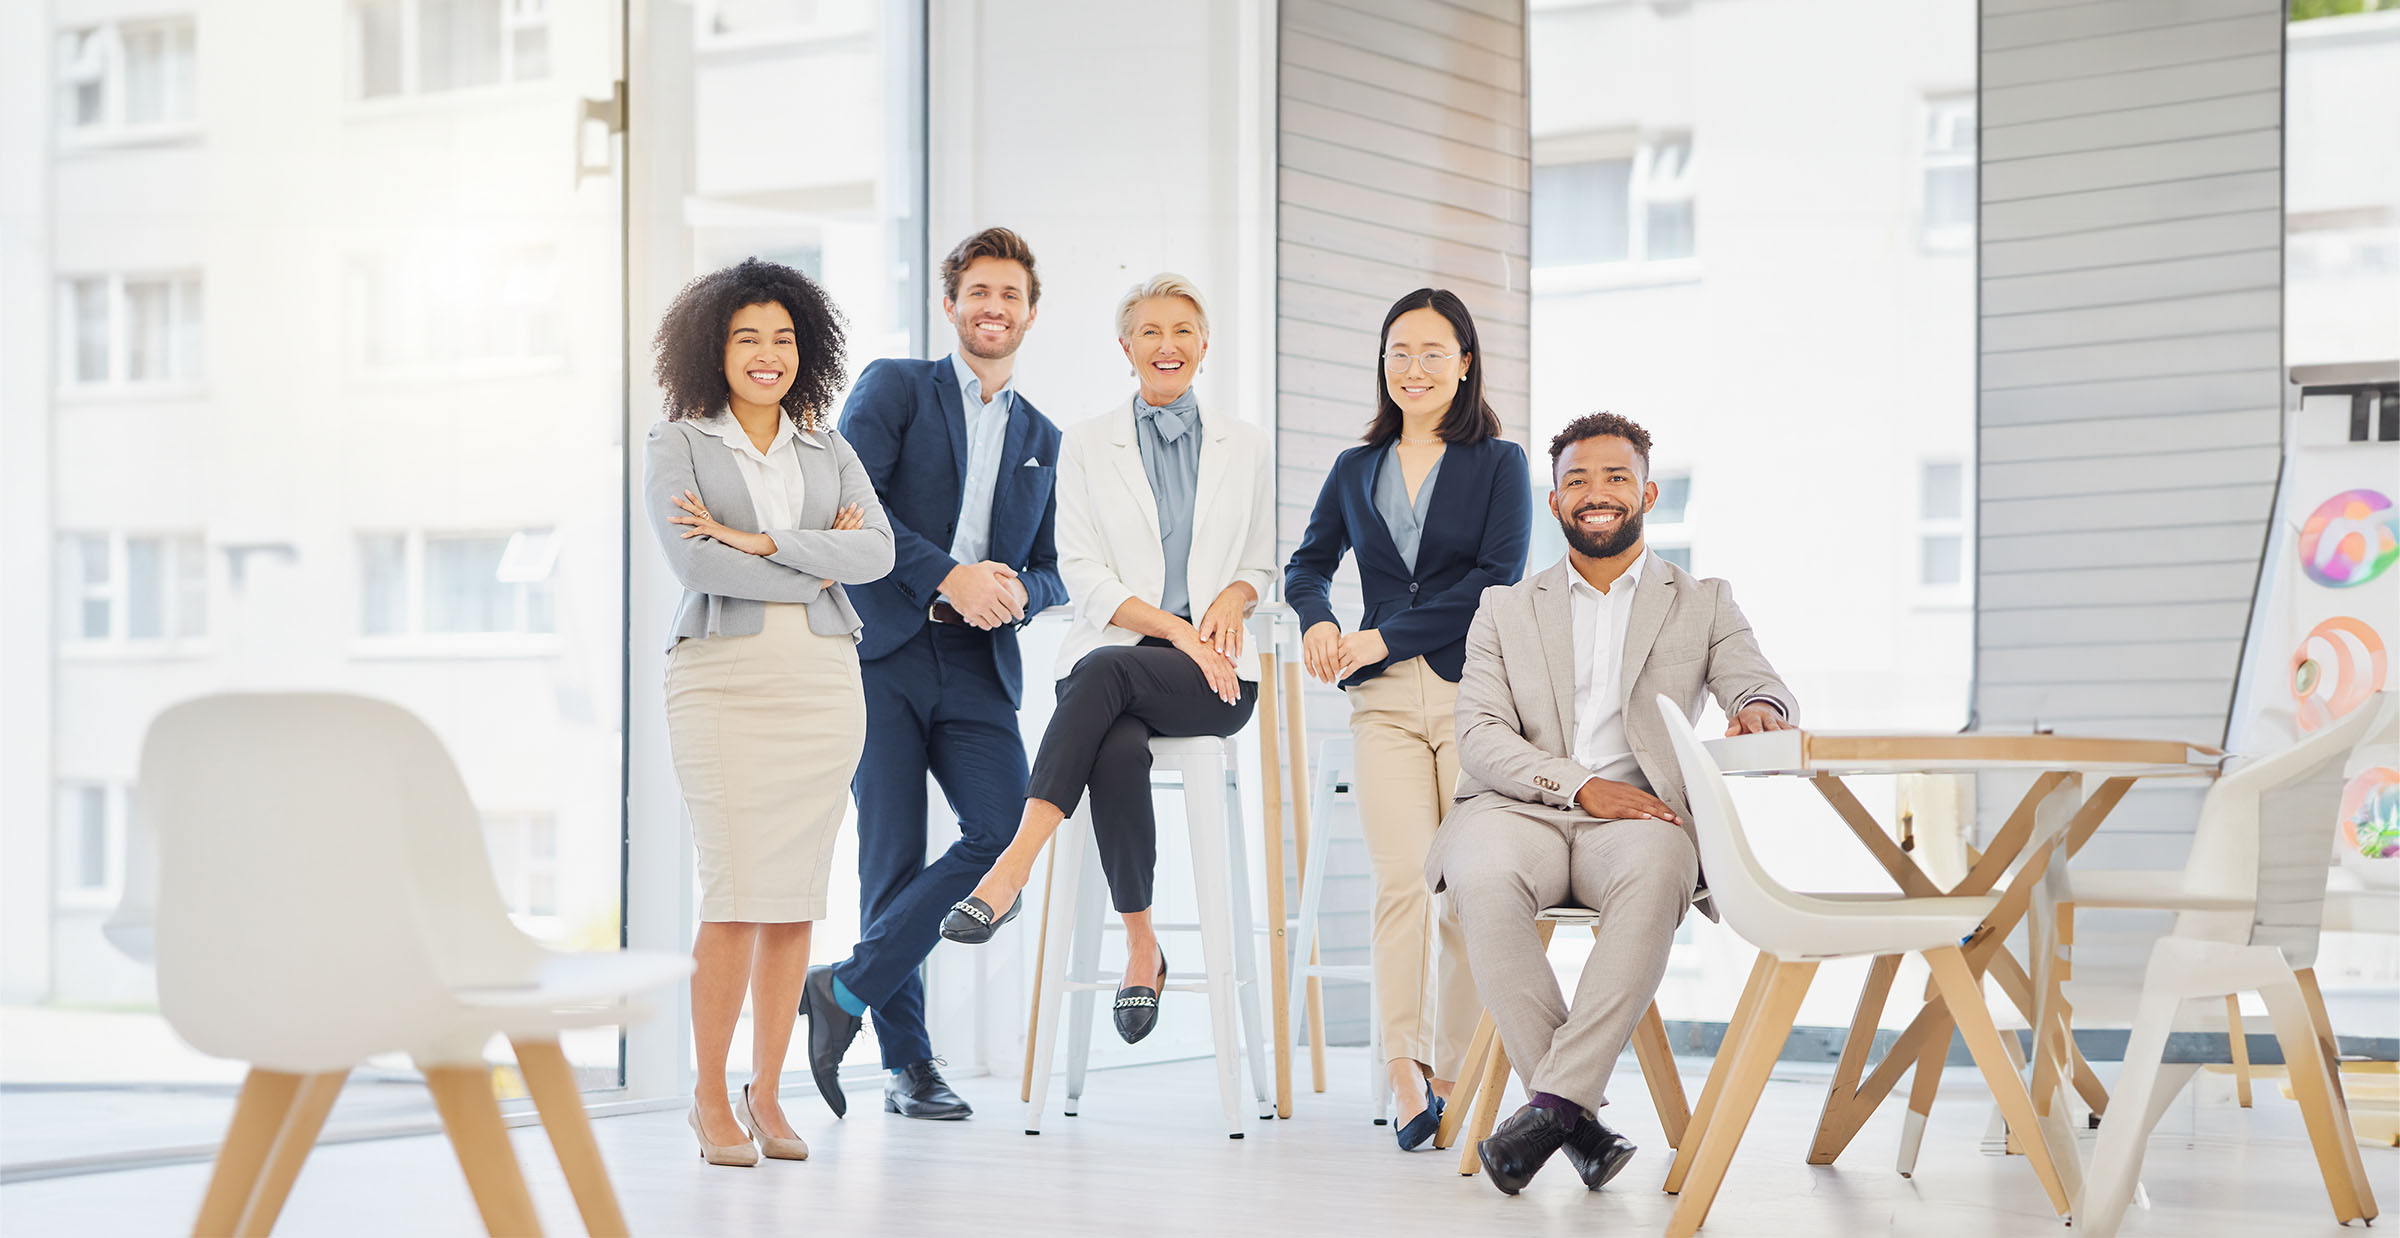 Portrait of a group of confident diverse businesspeople posing together in an office. Happy smiling.